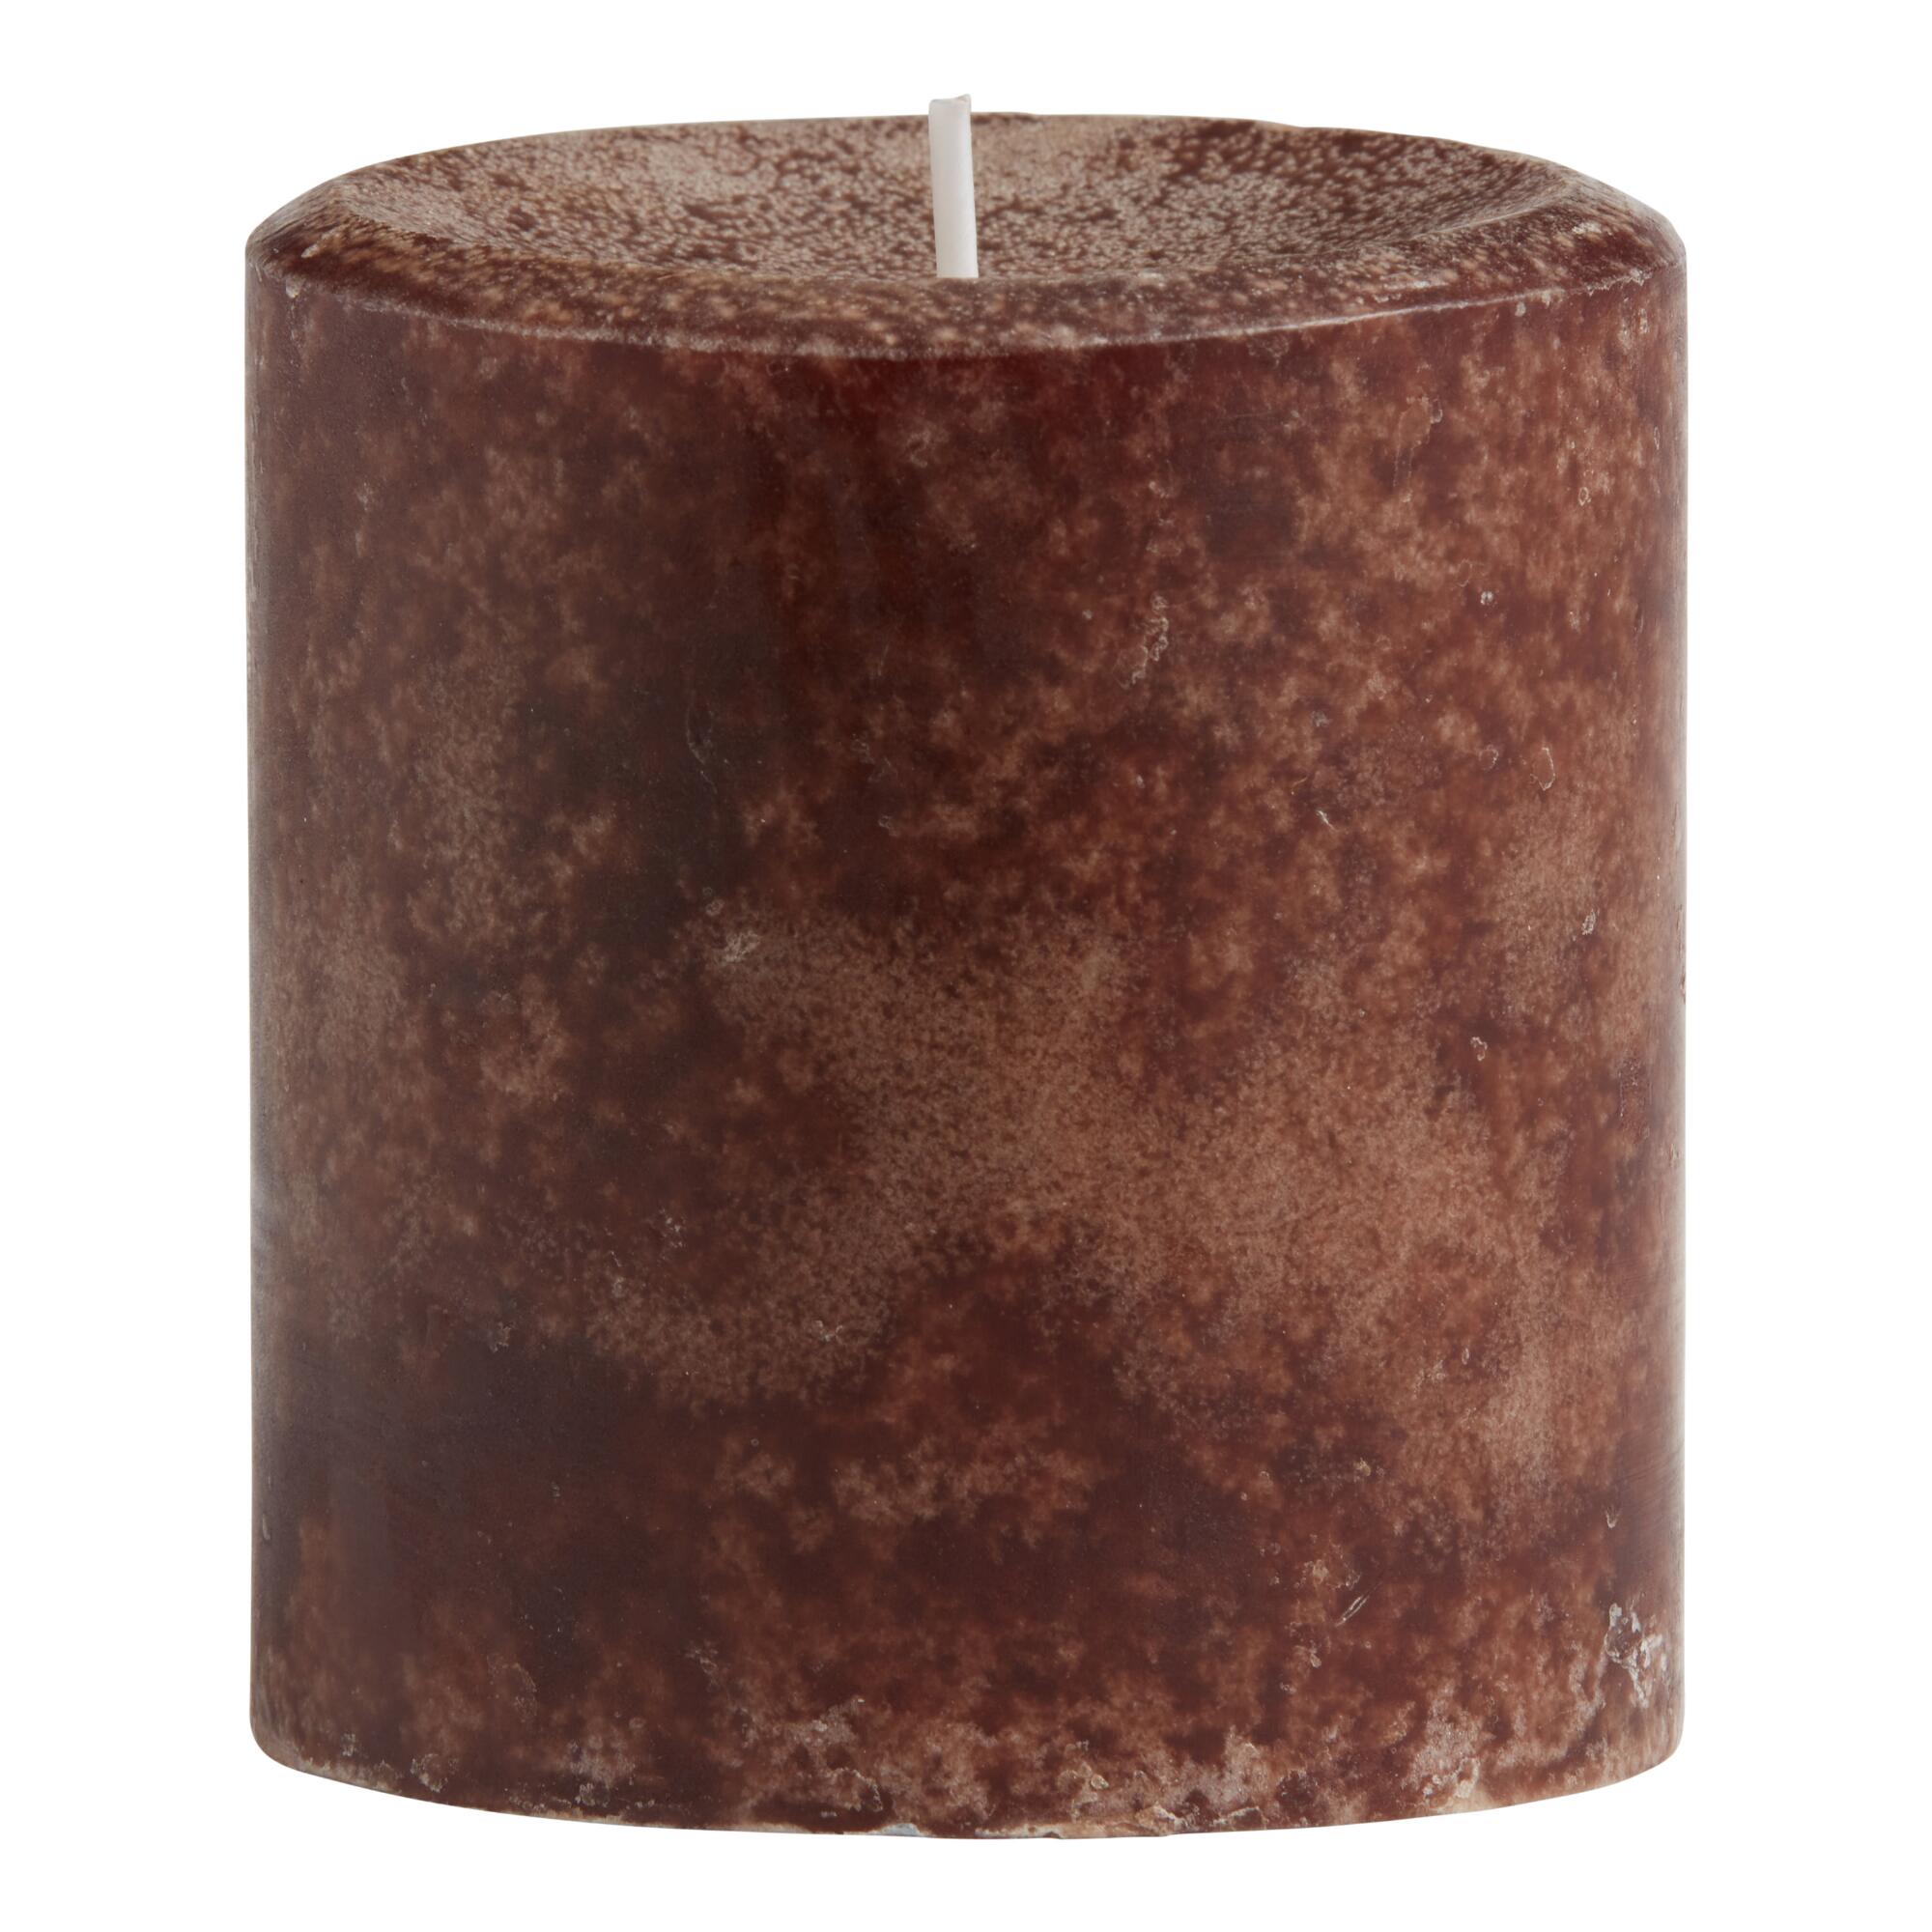 3x3 Tobacco Flower & Tonka Mottled Pillar Scented Candle: Brown - Scented Wax by World Market